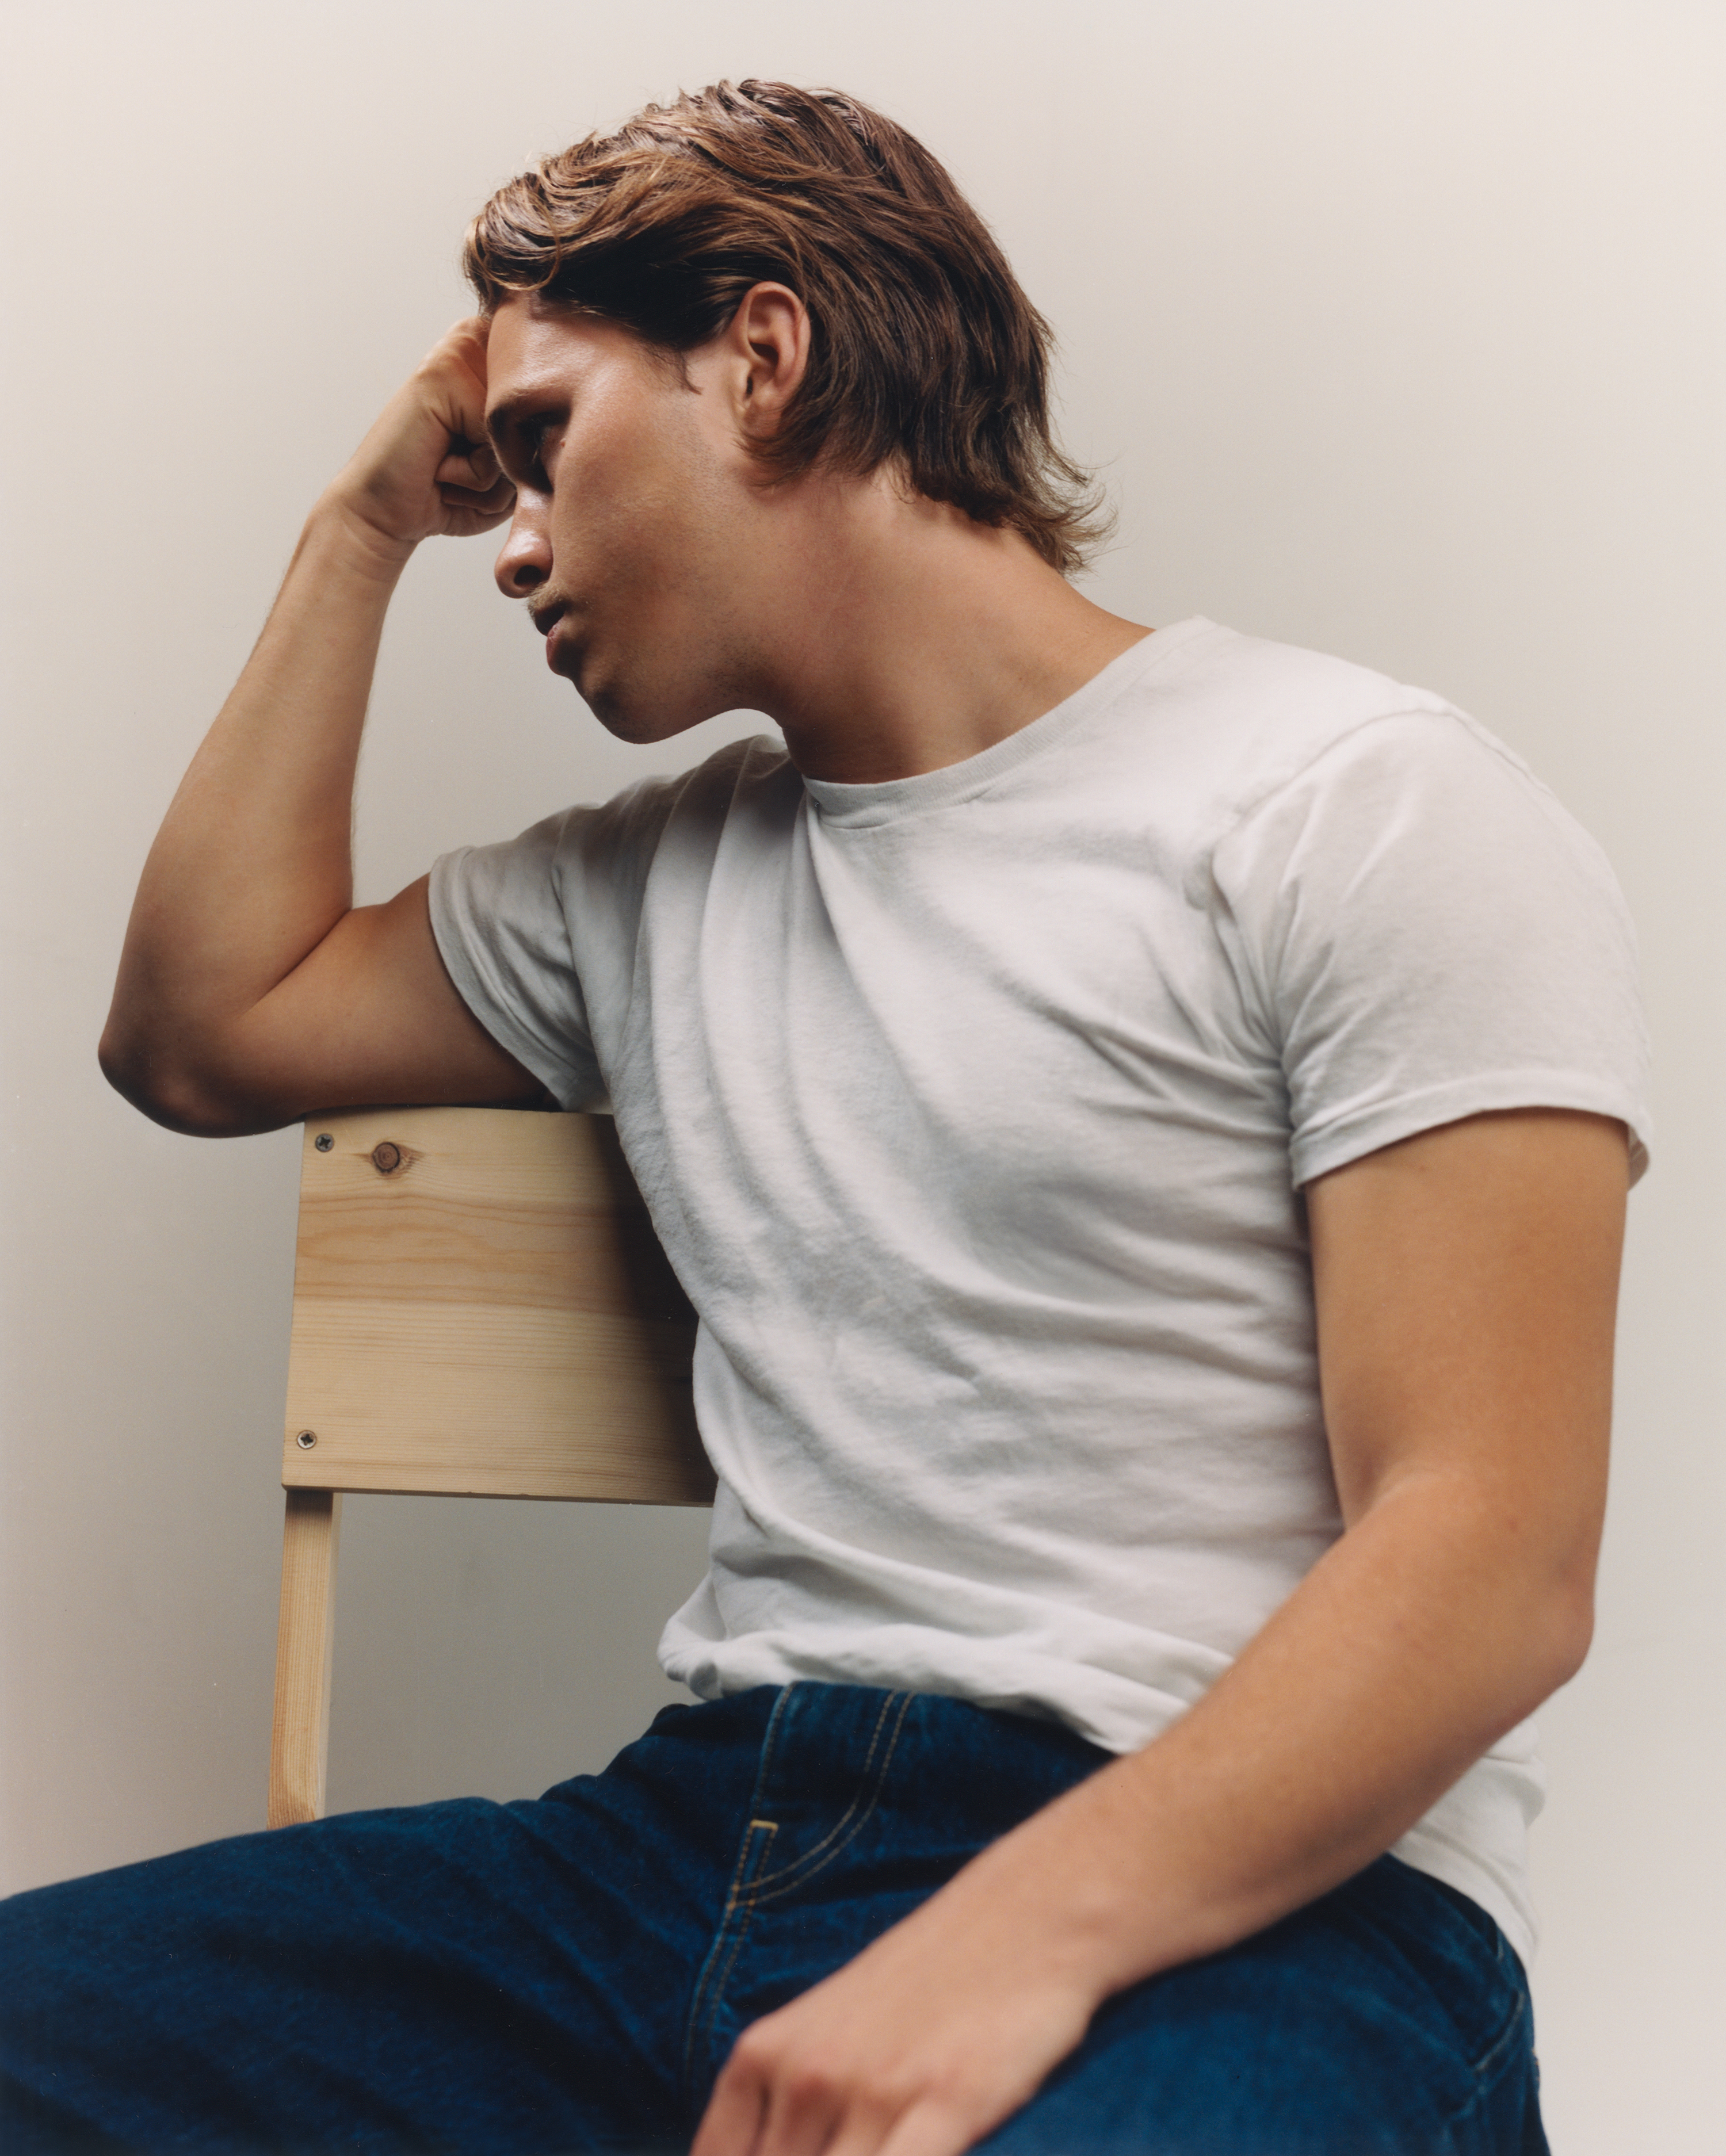 a portrait of the musician ryan beatty. he is a white man in his mid-twenties with a moustache and blonde hair. he's wearing a white t-shirt and blue-jeans. he's sat on a wooden chair resting his arm against it and his fist on his forehead, looking off to his right. 